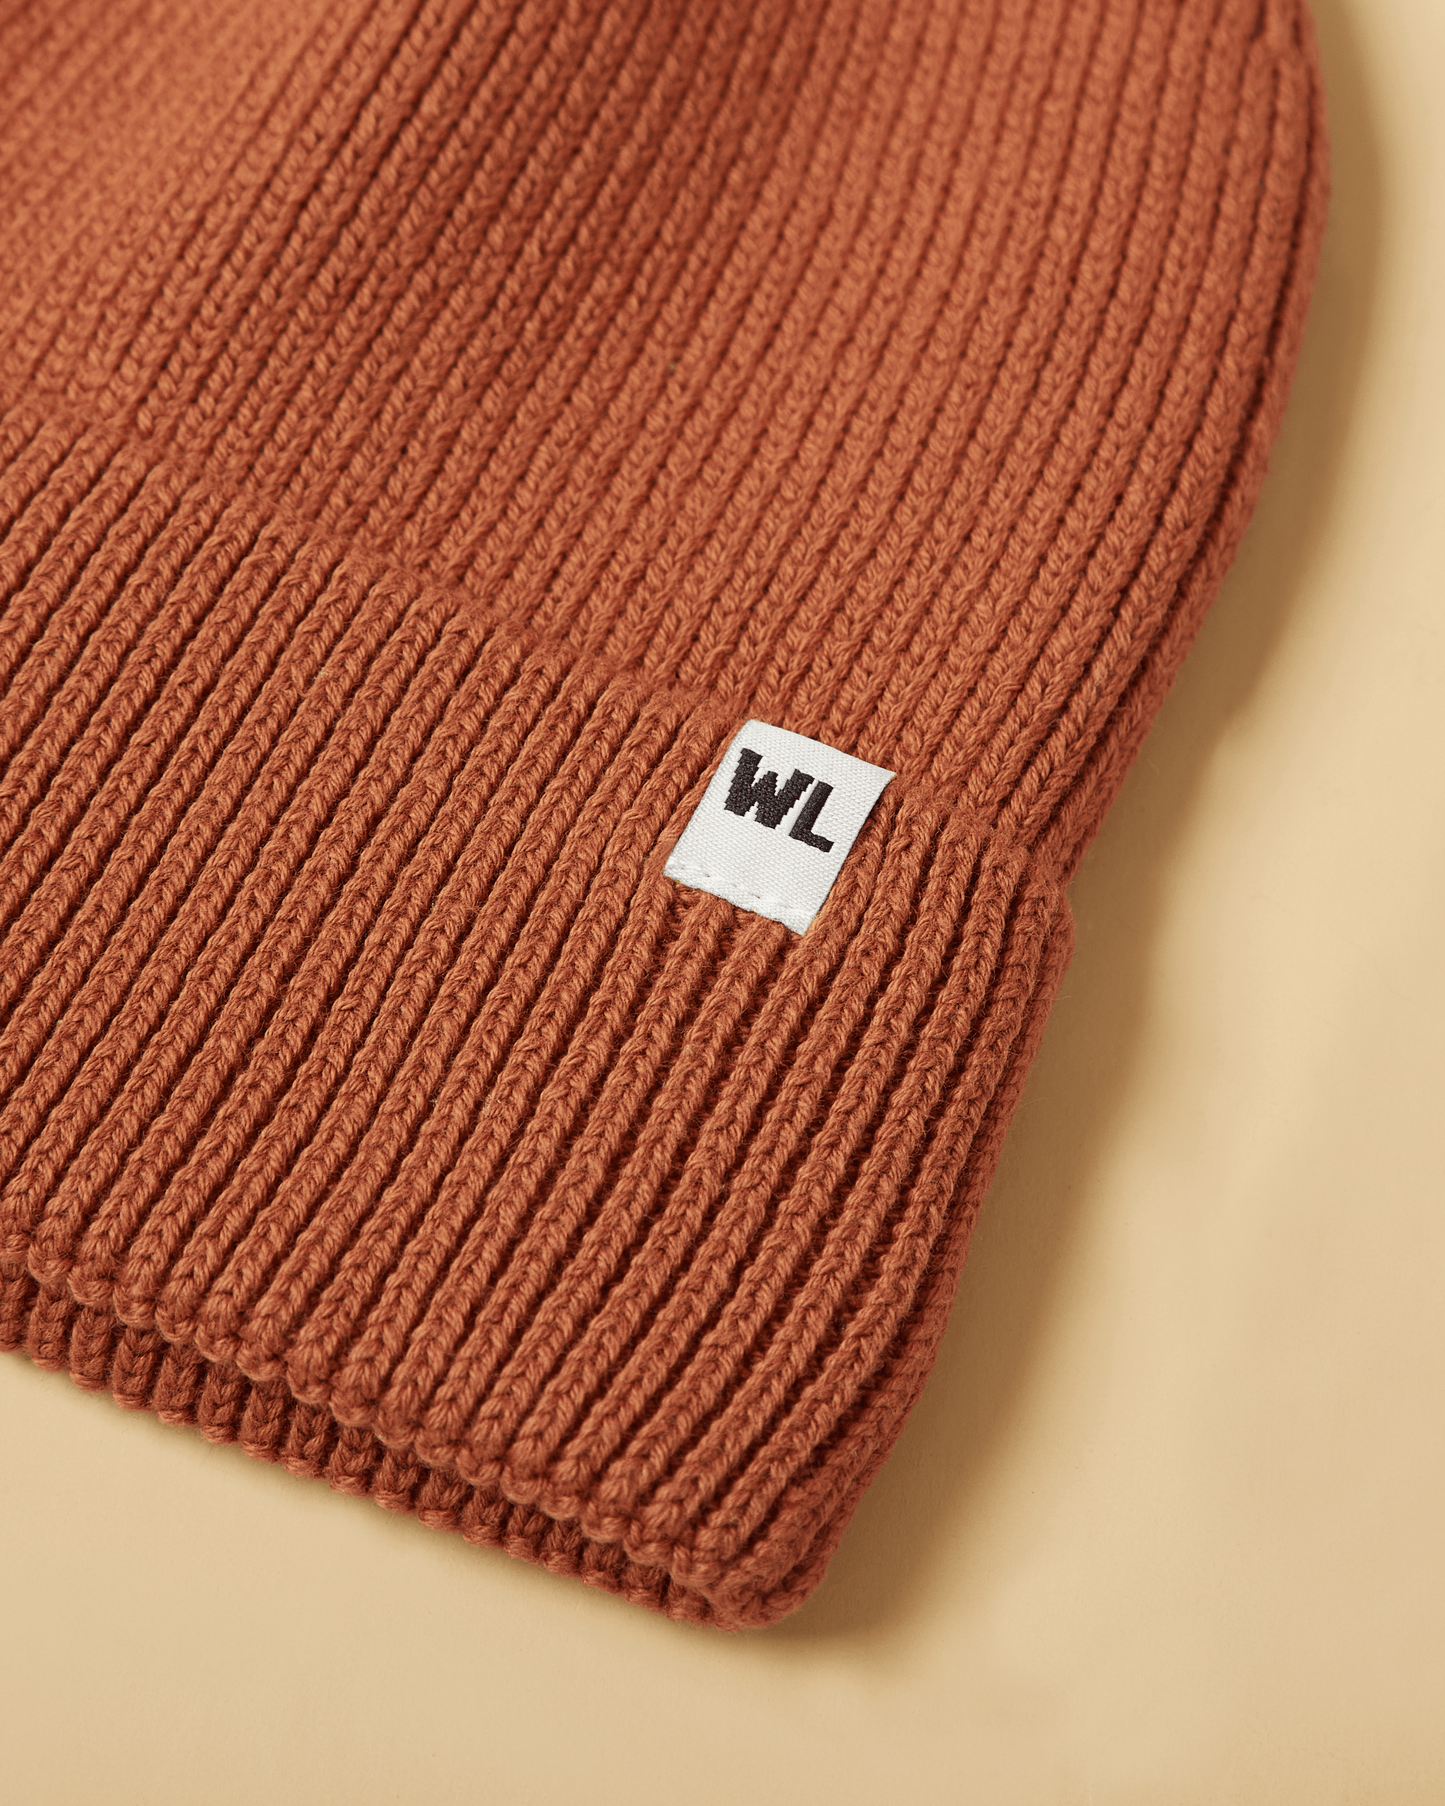 The Wrap Life Cuffed Satin Lined Beanie in Sienna Red Hat